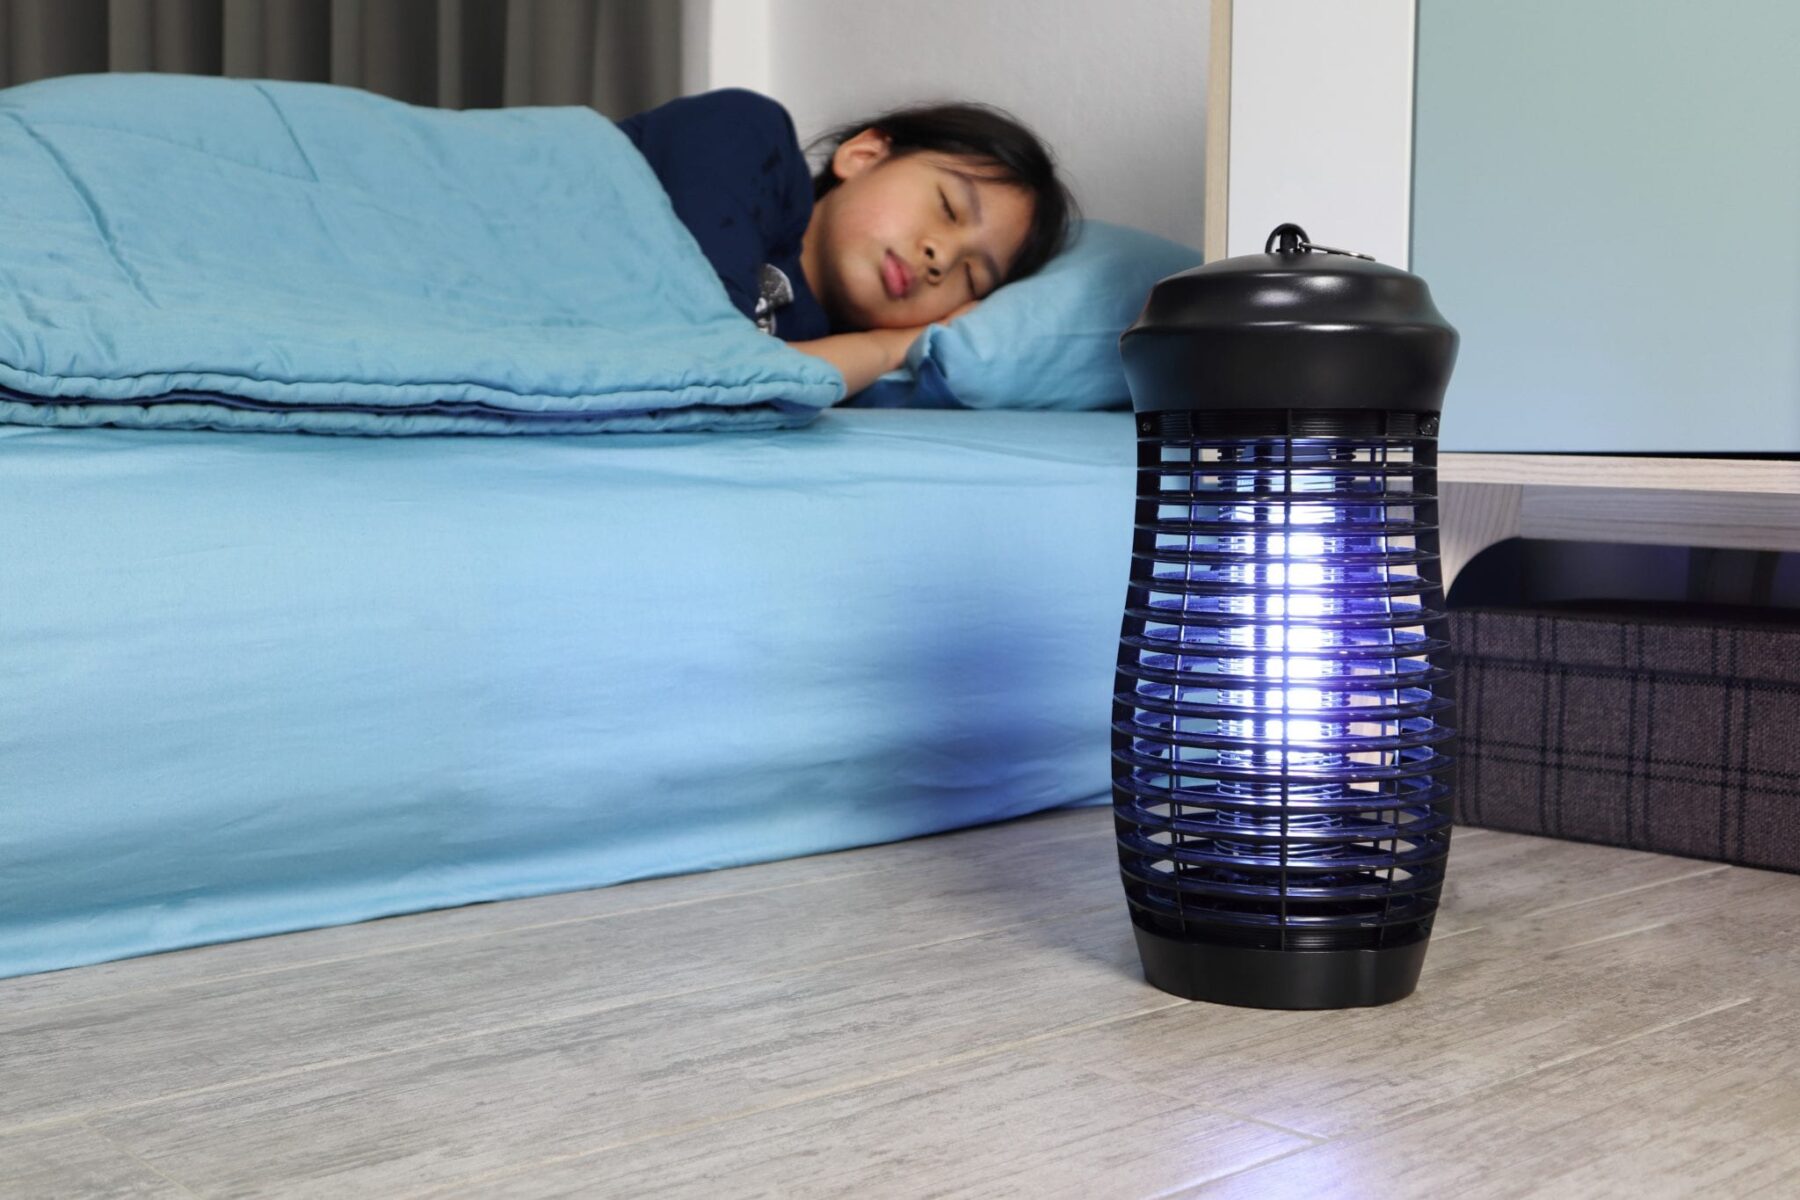 Child sleeping on mattress with blue sheets and bug zapper on the floor next to her